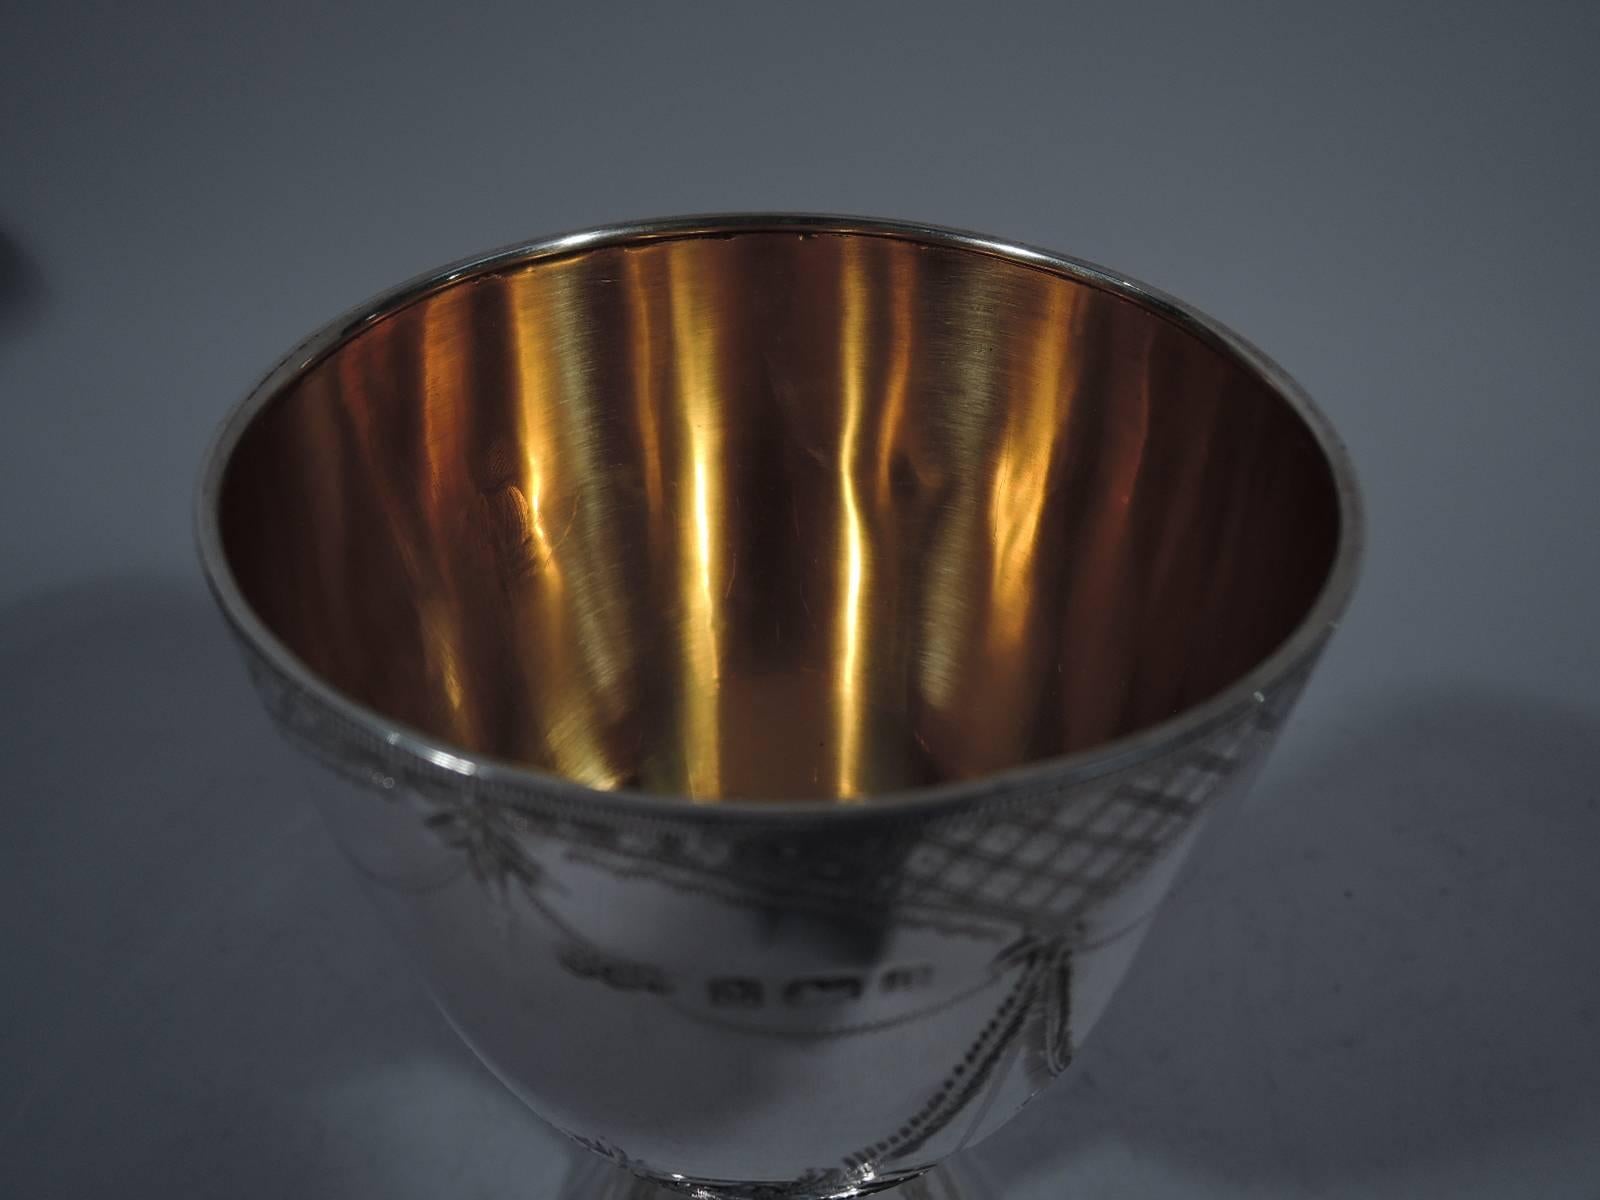 Edwardian sterling silver goblet. Made by Joseph Gloster in Birmingham in 1909. Bowl has curved base and is mounted to concave stem and dome foot. Bowl has four cartouches (vacant) formed by engraved diaper ground and floral garlands. Scrolled and